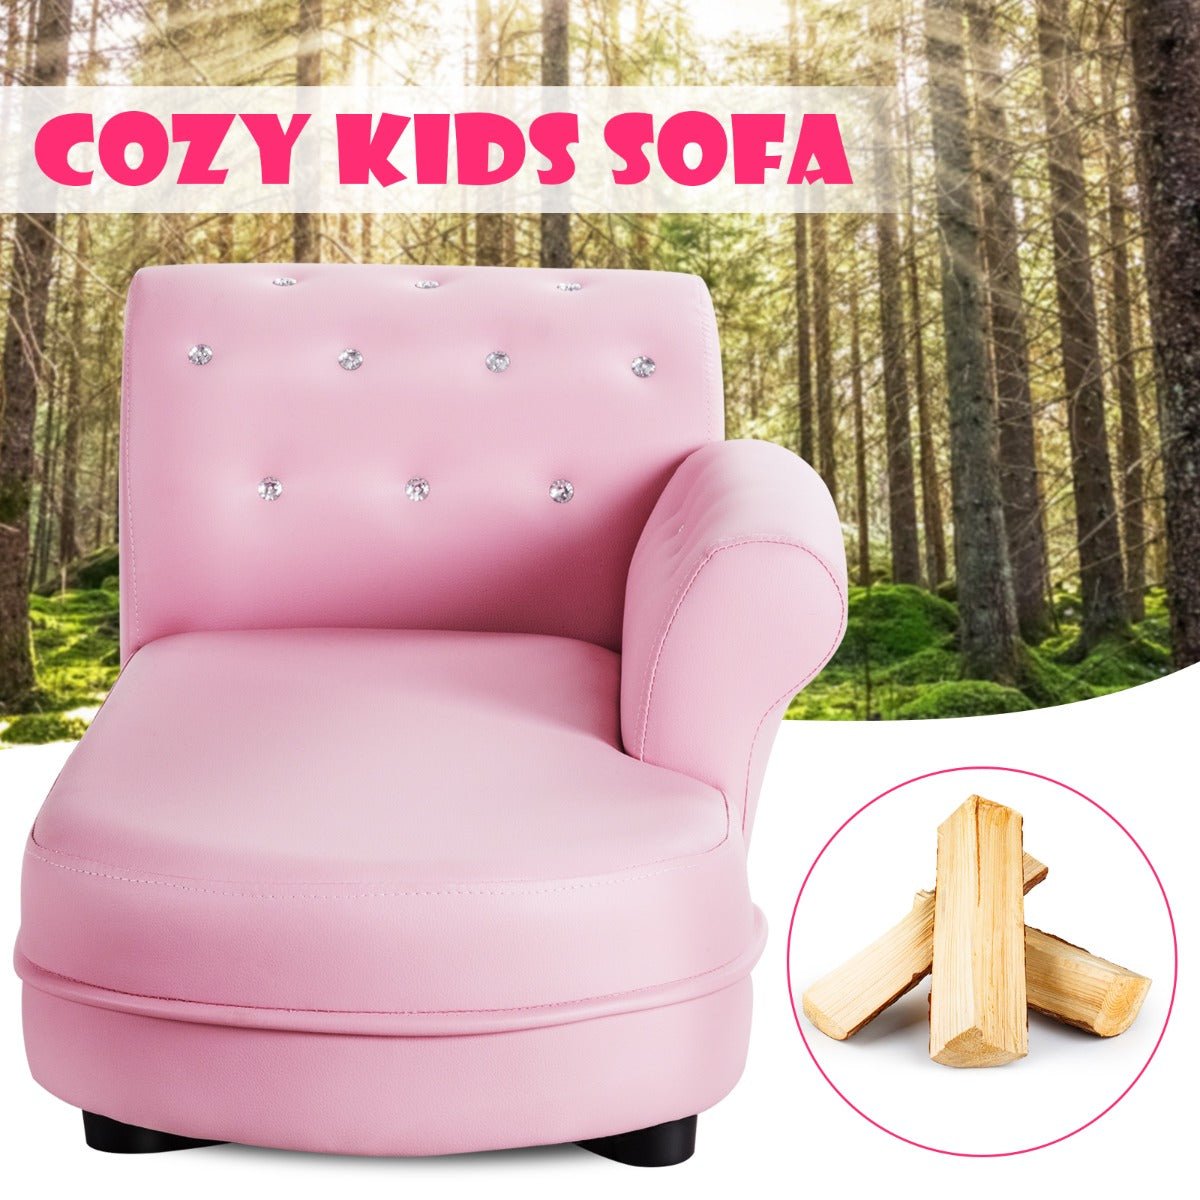 Children's Pink Sofa: PVC Leather with Embedded Crystals - Comfort and Elegance